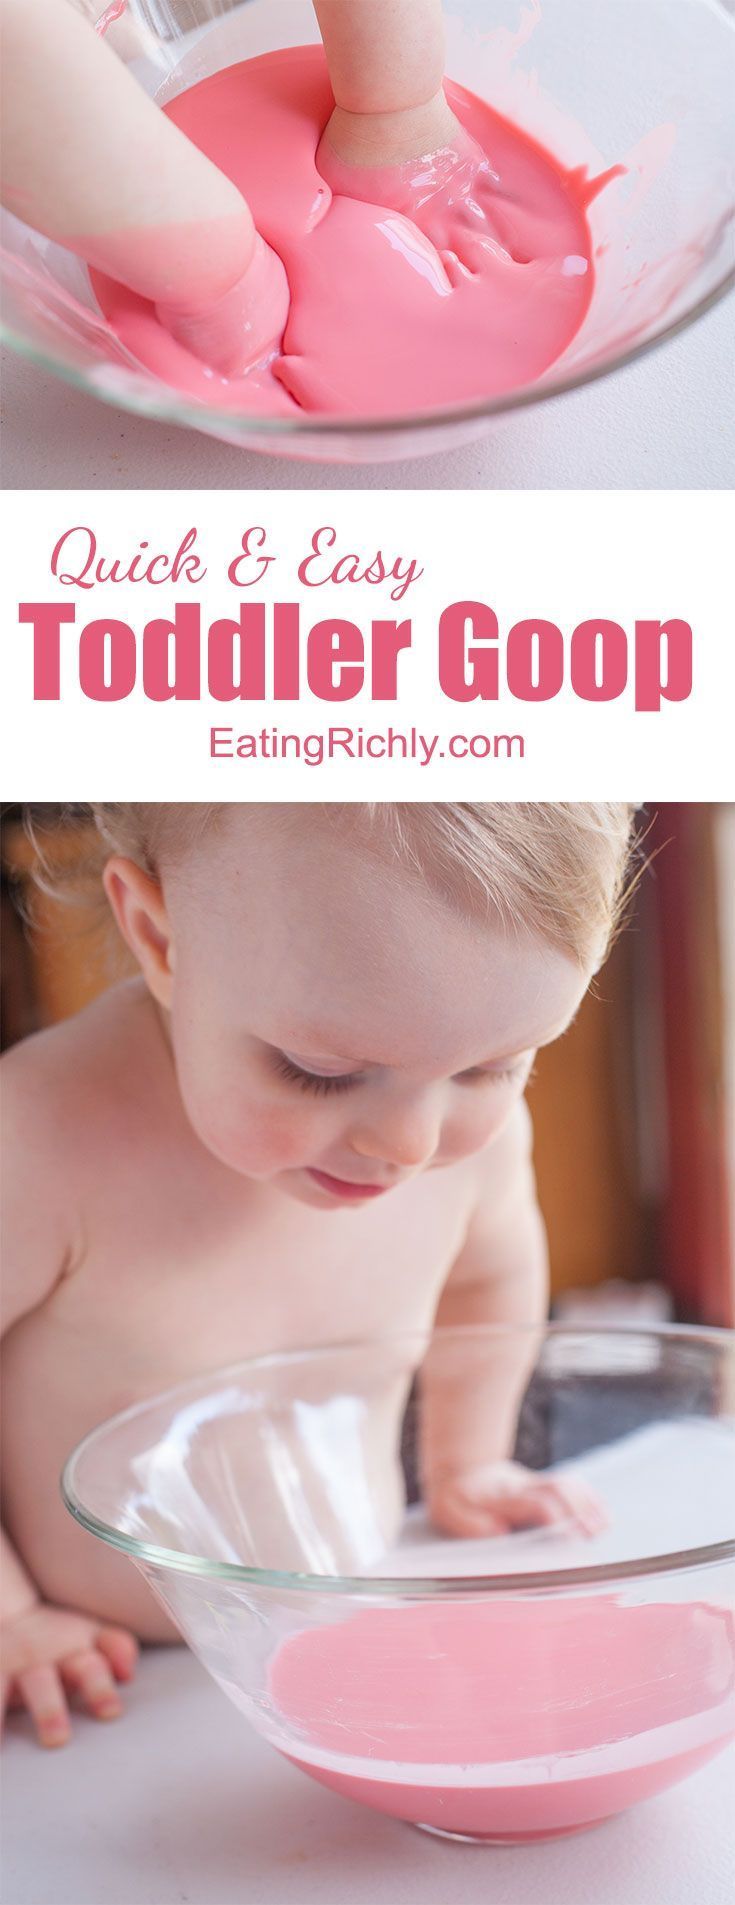 Kids of all ages love making, and playing with, this easy goo recipe. Moms love that it's completely safe for even the youngest toddlers! From EatingRichly.com -   24 toddler crafts for girls
 ideas